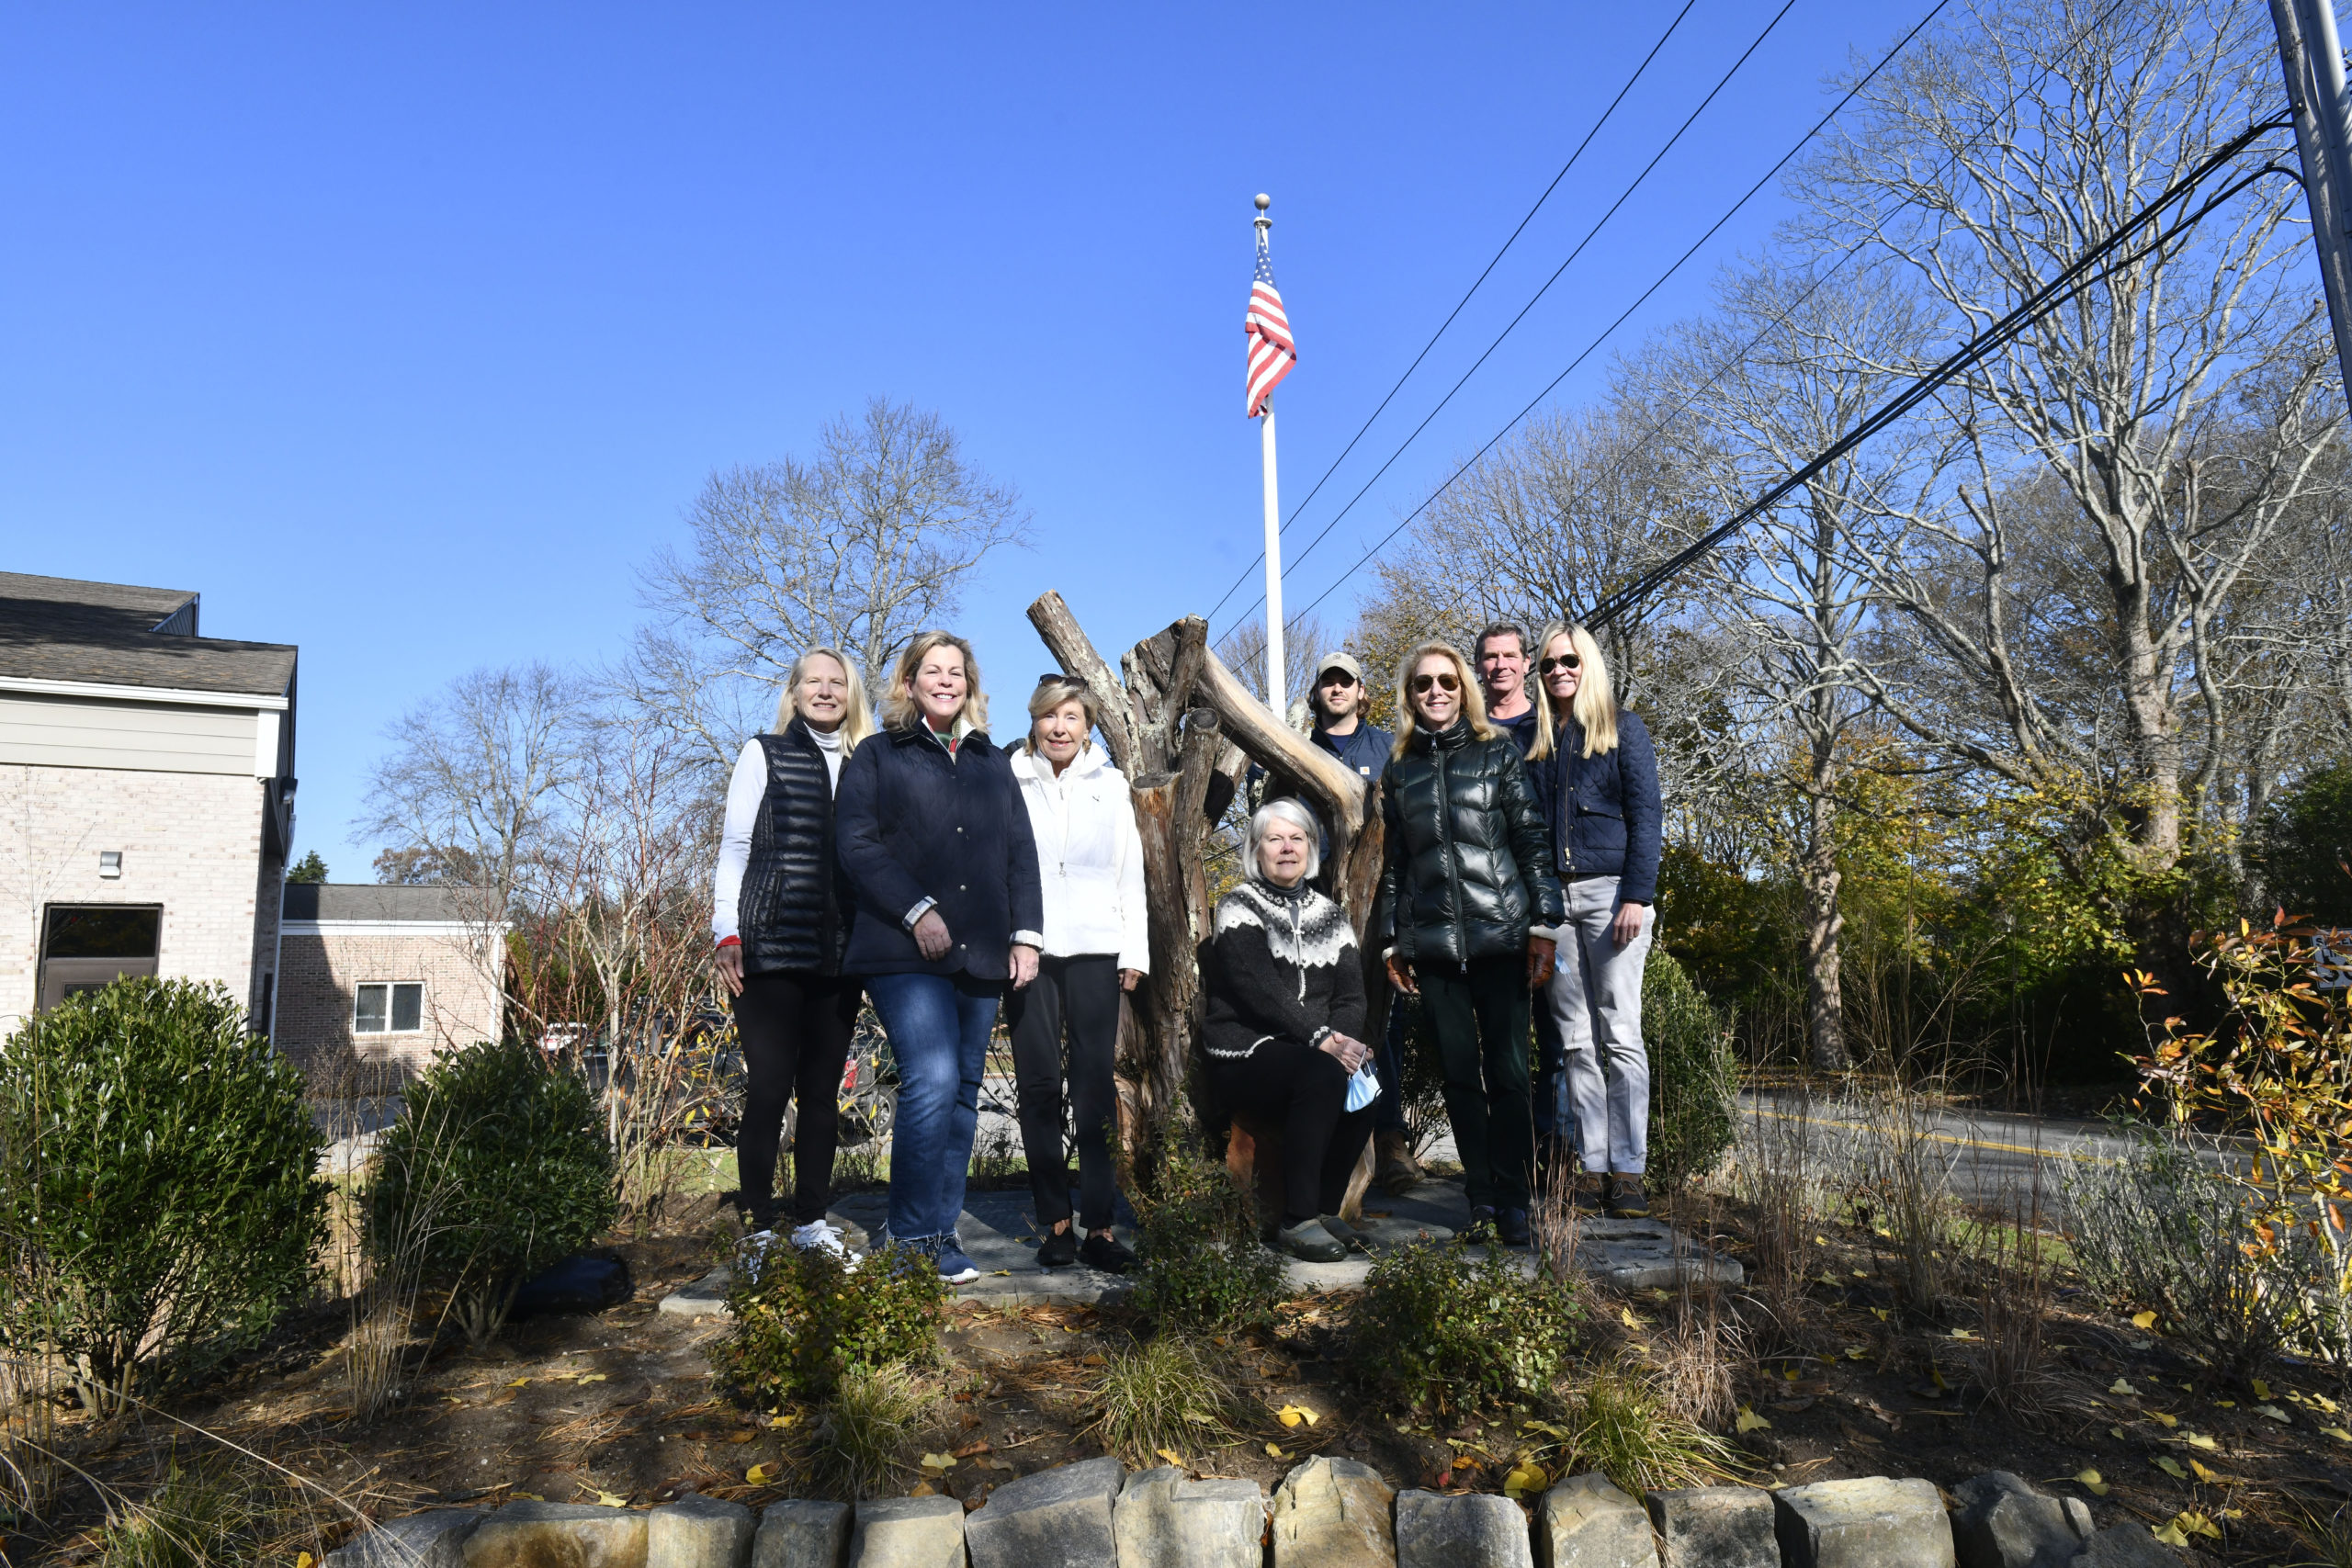 The Southampton Garden Club, along with Jacob Antilety Landscaping, recently revamped the Liberty Garden located at the Southampton Fire Station on the corner of Montauk Highway and St. Andrews Road. The Liberty Garden was created after the September 11, 2001 attacks. The garden now boasts native plants, pollinators and a sculpted yew tree stump. In the garden, left to right are, Helene Fagan Barbara Glatt, Christl Meszkat, Lydia Wallis, Alex Antilety, Sacha MacNaughton, Mark Antilety and Deborah De La Gueronniere.     DANA SHAW